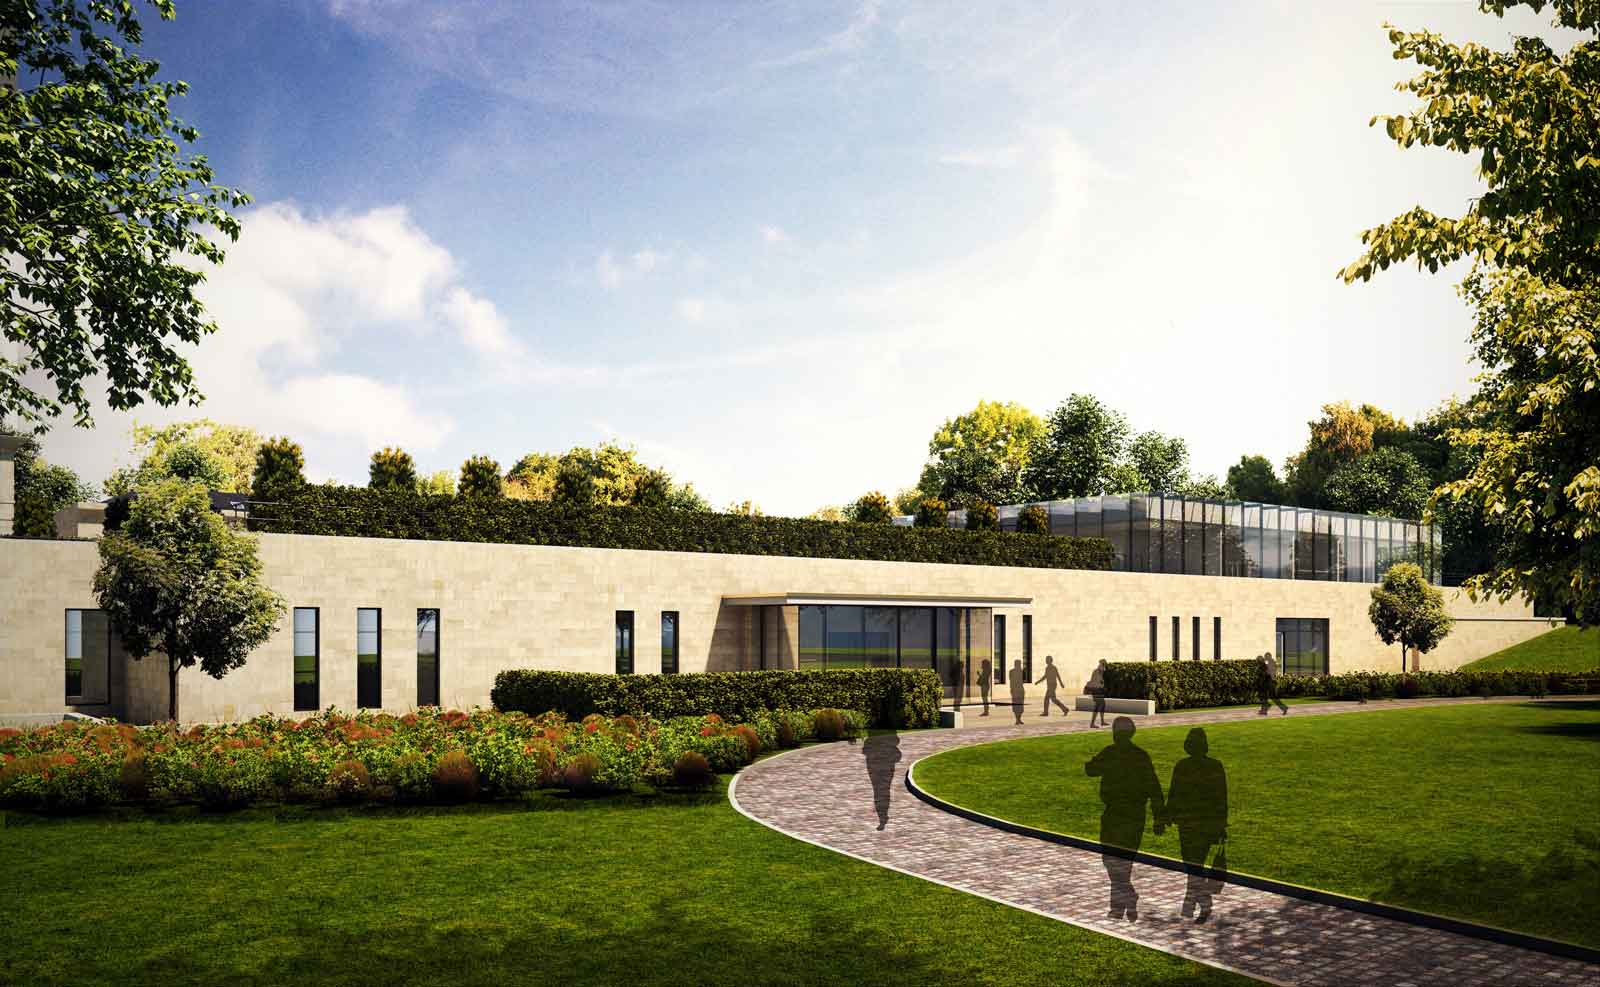 Rudding Park in Harrogate has created 50 new job opportunities as it prepares to open its new £9.5m spa in May 2017.